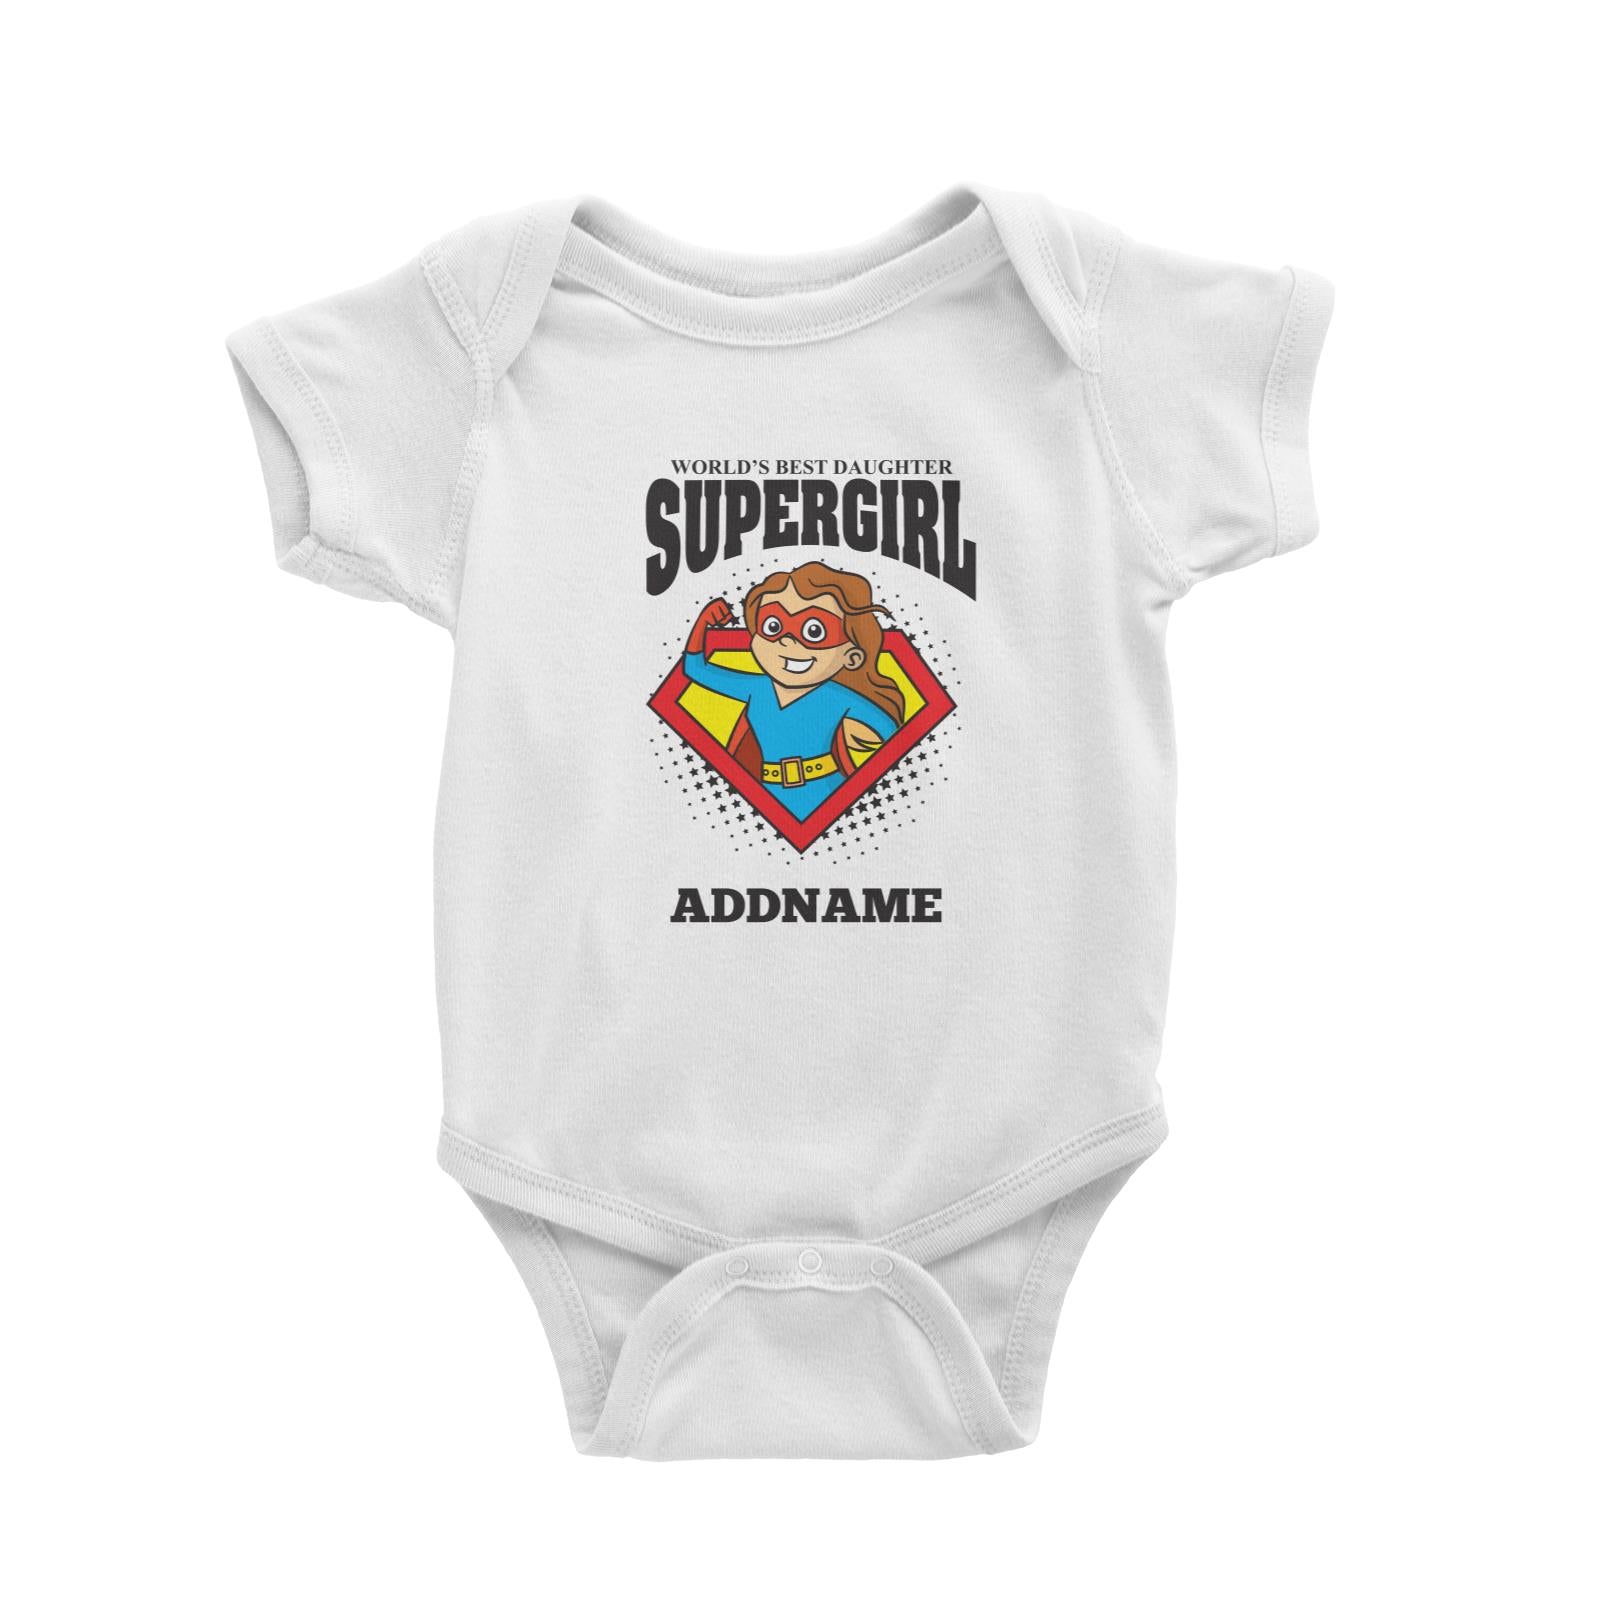 Best Daughter Supergirl Girl (FLASH DEAL) Baby Romper Personalizable Designs Matching Family Superhero Family Edition Superhero